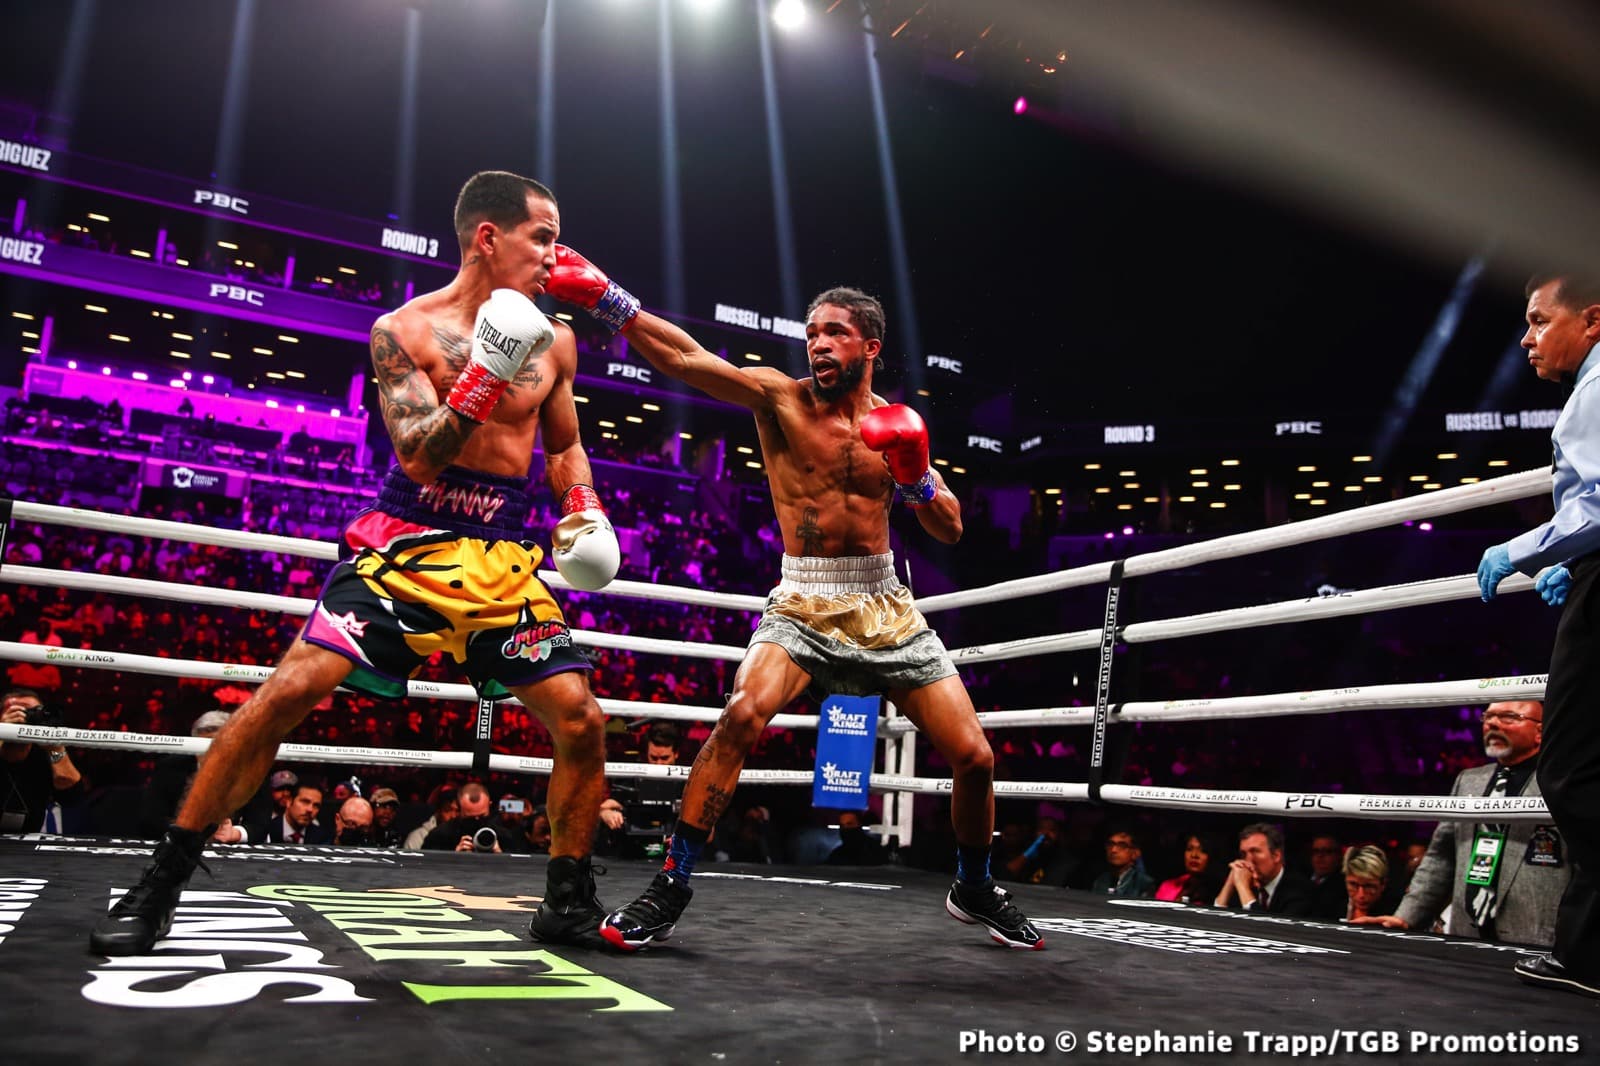 Image: Results / Photos: Deontay Wilder Returns In Grand Fashion With First Round Knockout!